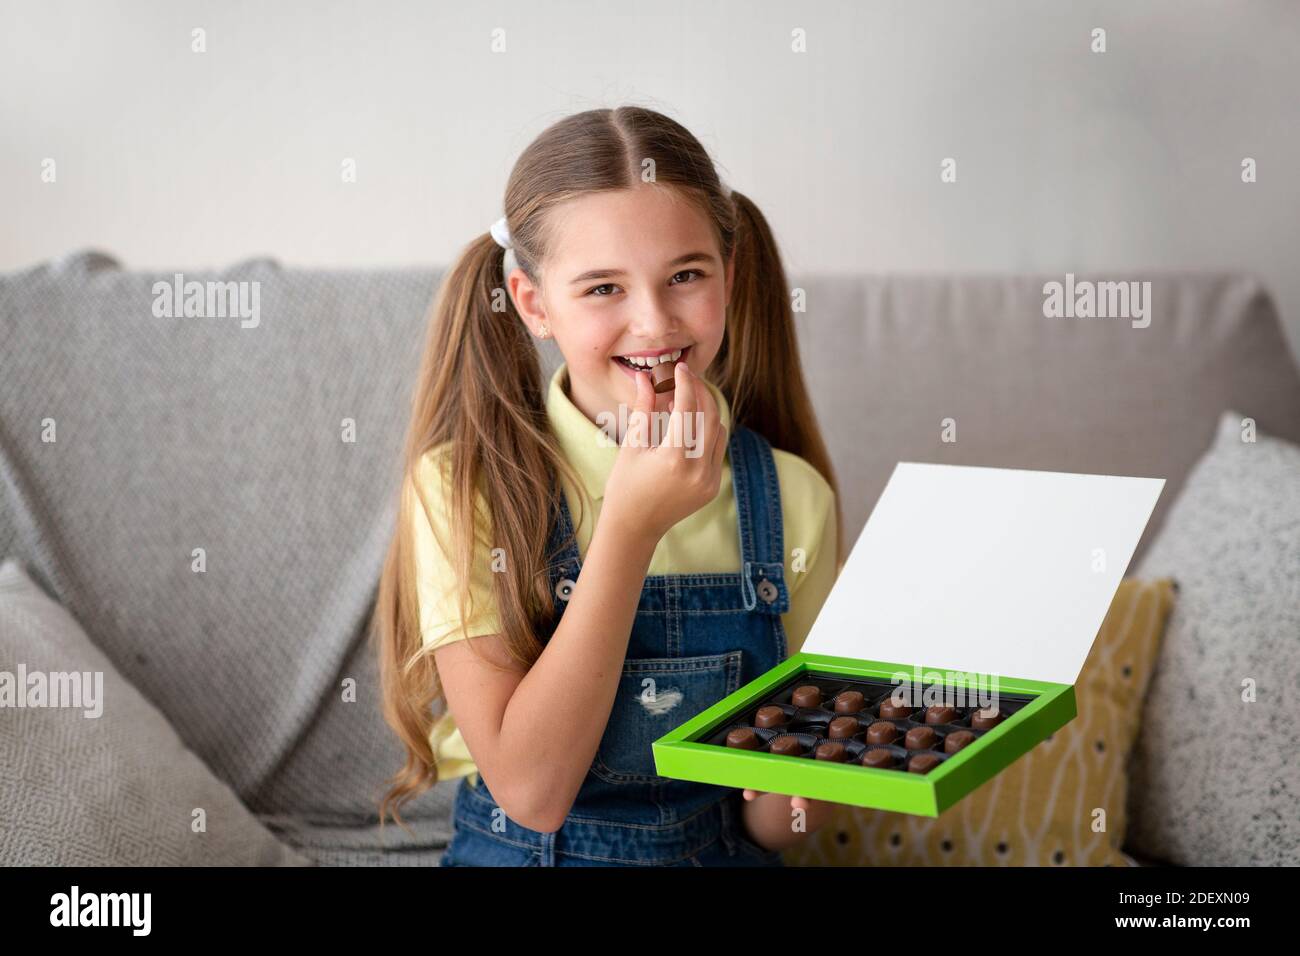 Girl eating chocolate candy sitting on a couch at home Stock Photo